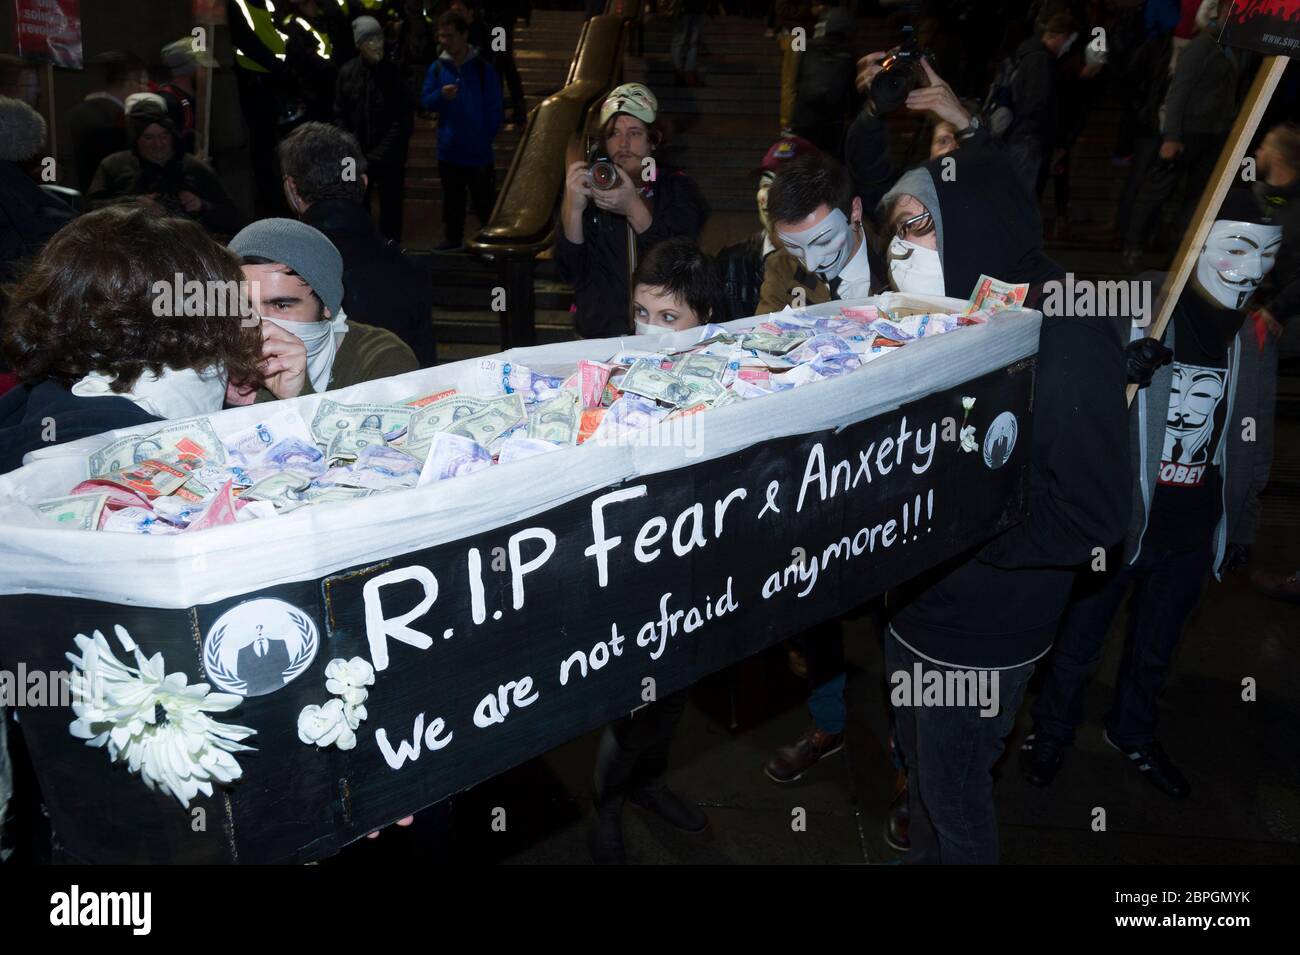 The 'Million Mask March' sees protests wearing V for Vendetta-style Guy Fawkes masks and demonstrating against austerity, the infringement of civil ri Stock Photo